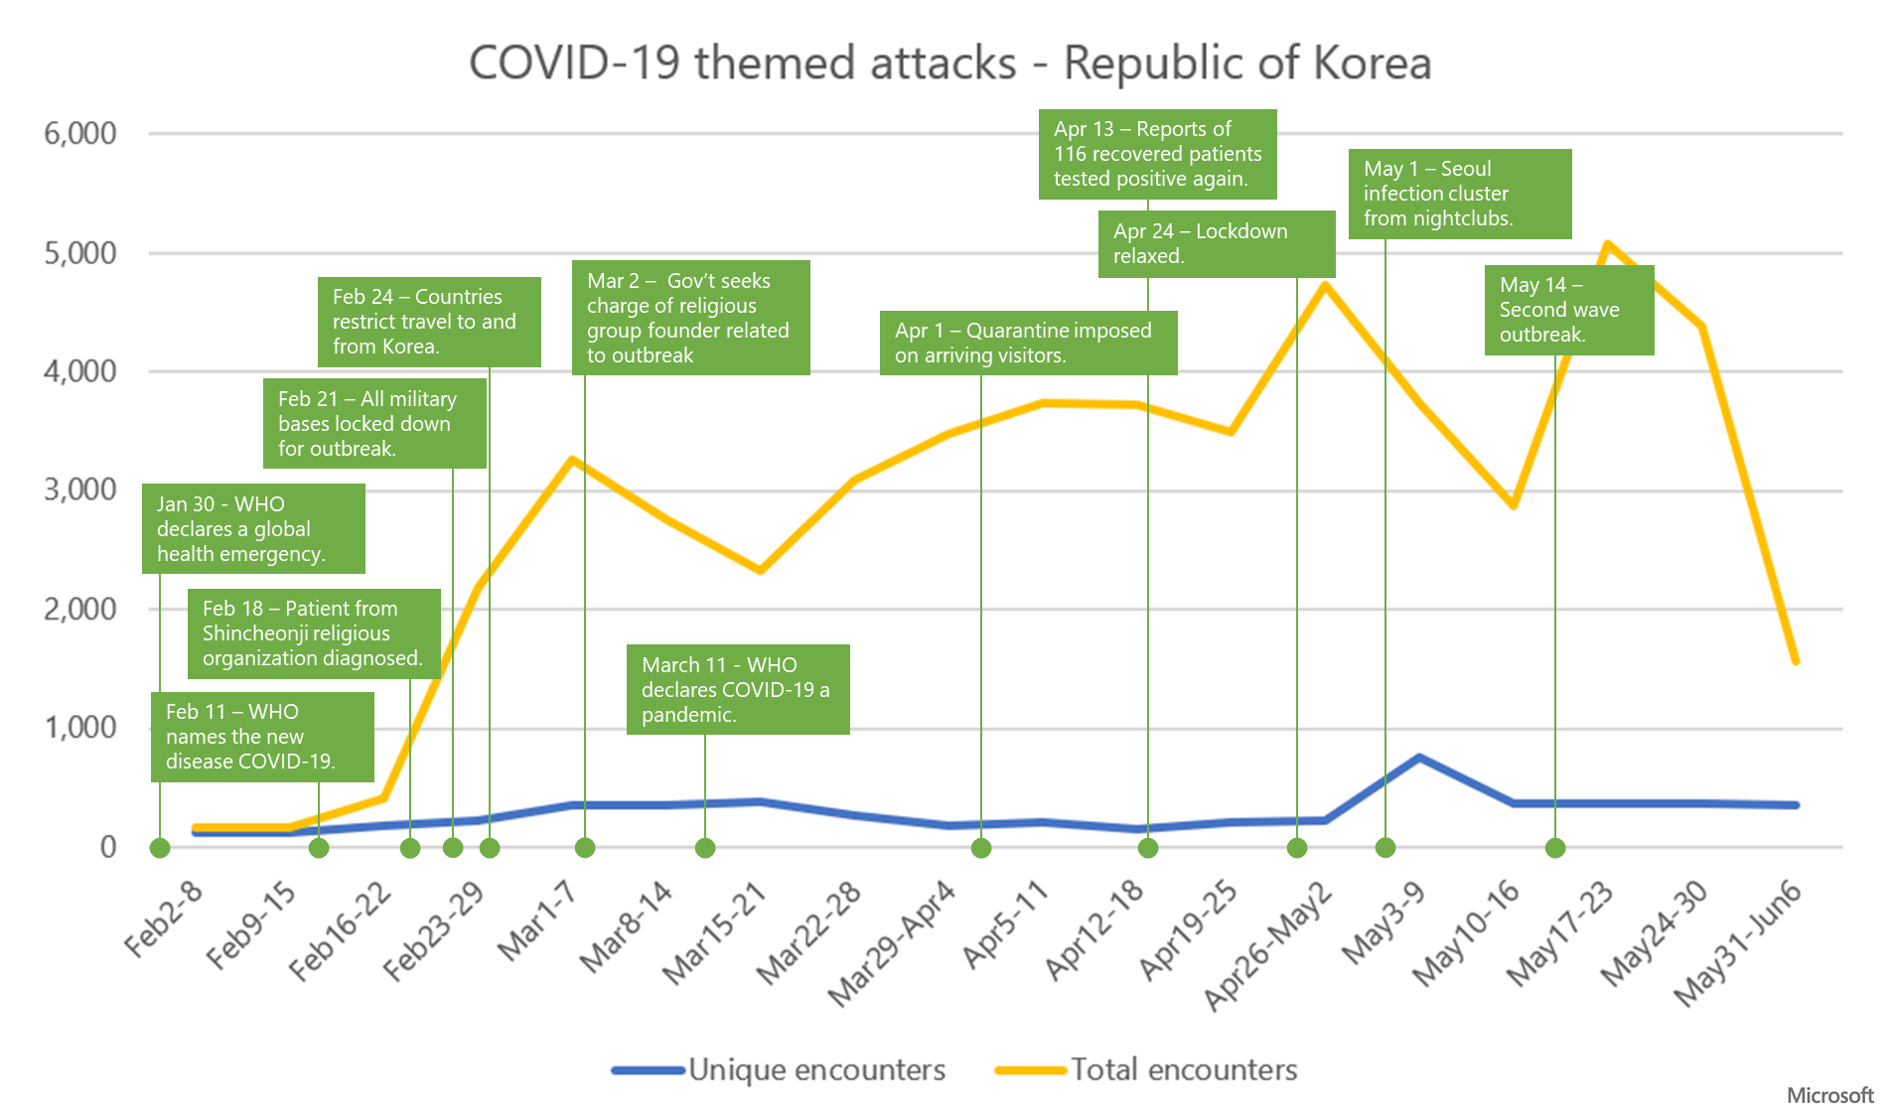 Graph showing trend of COVID-19 themed attacks and key events during the outbreak in South Korea